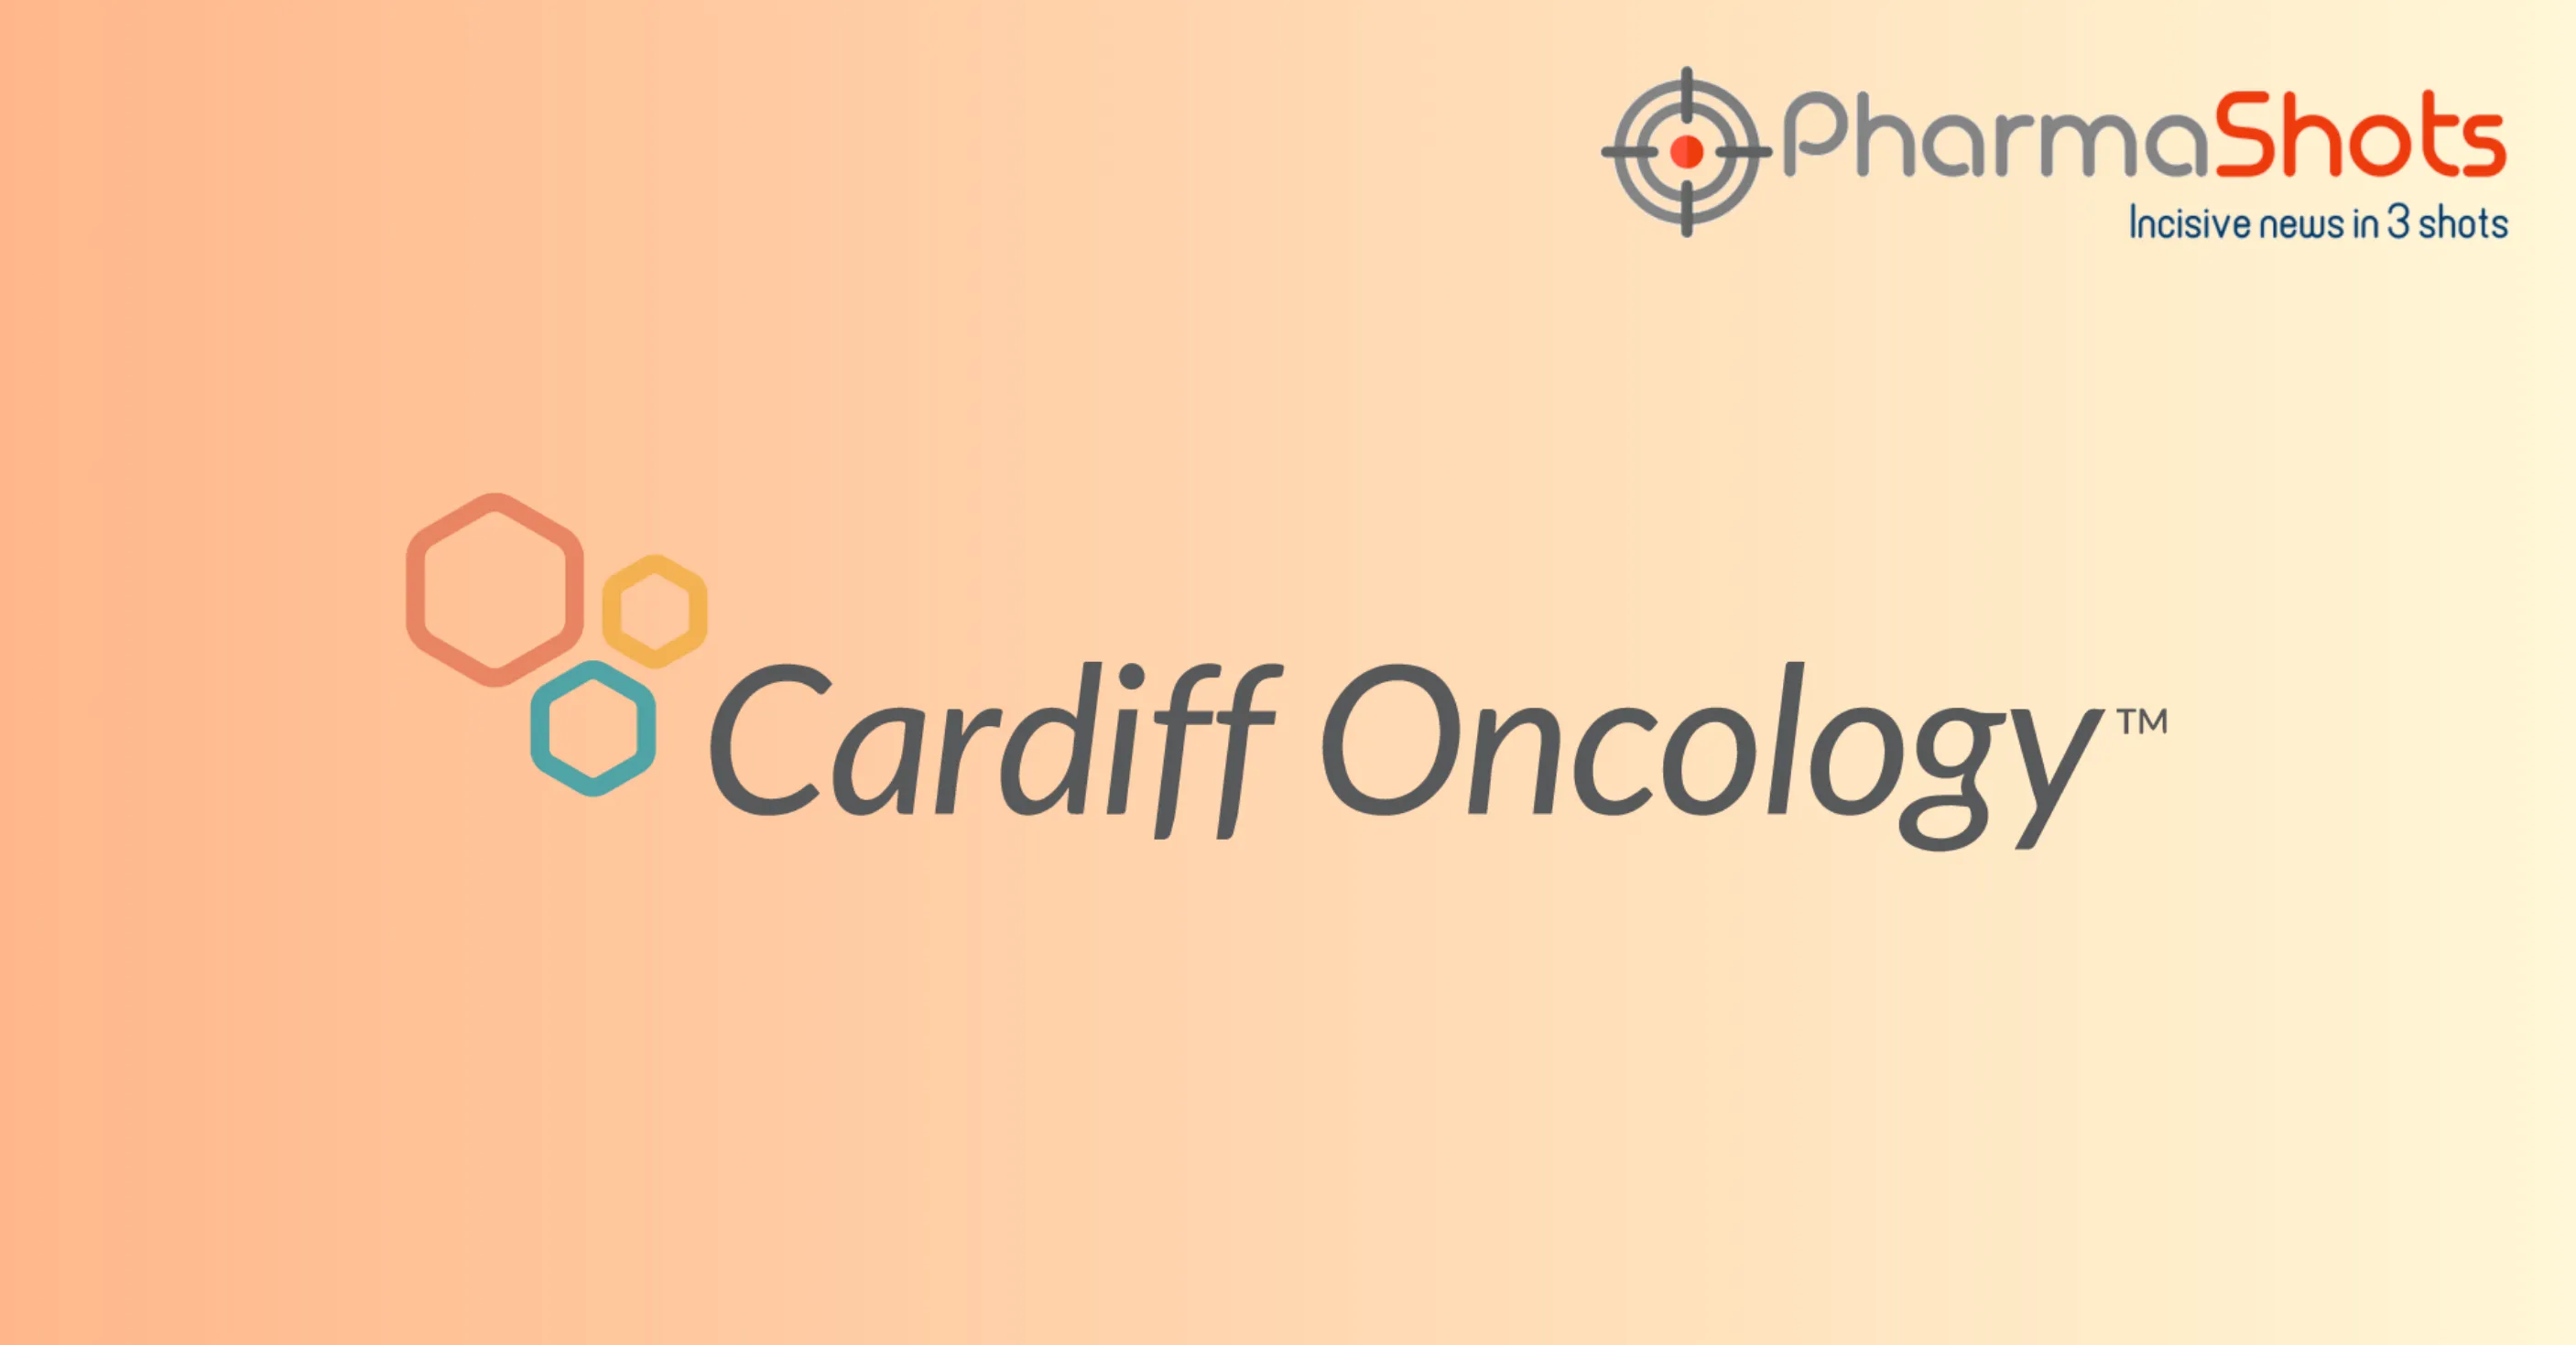 Cardiff Oncology Reports Results for Onvansertib in P-II Trial for the Treatment of Colorectal Cancer